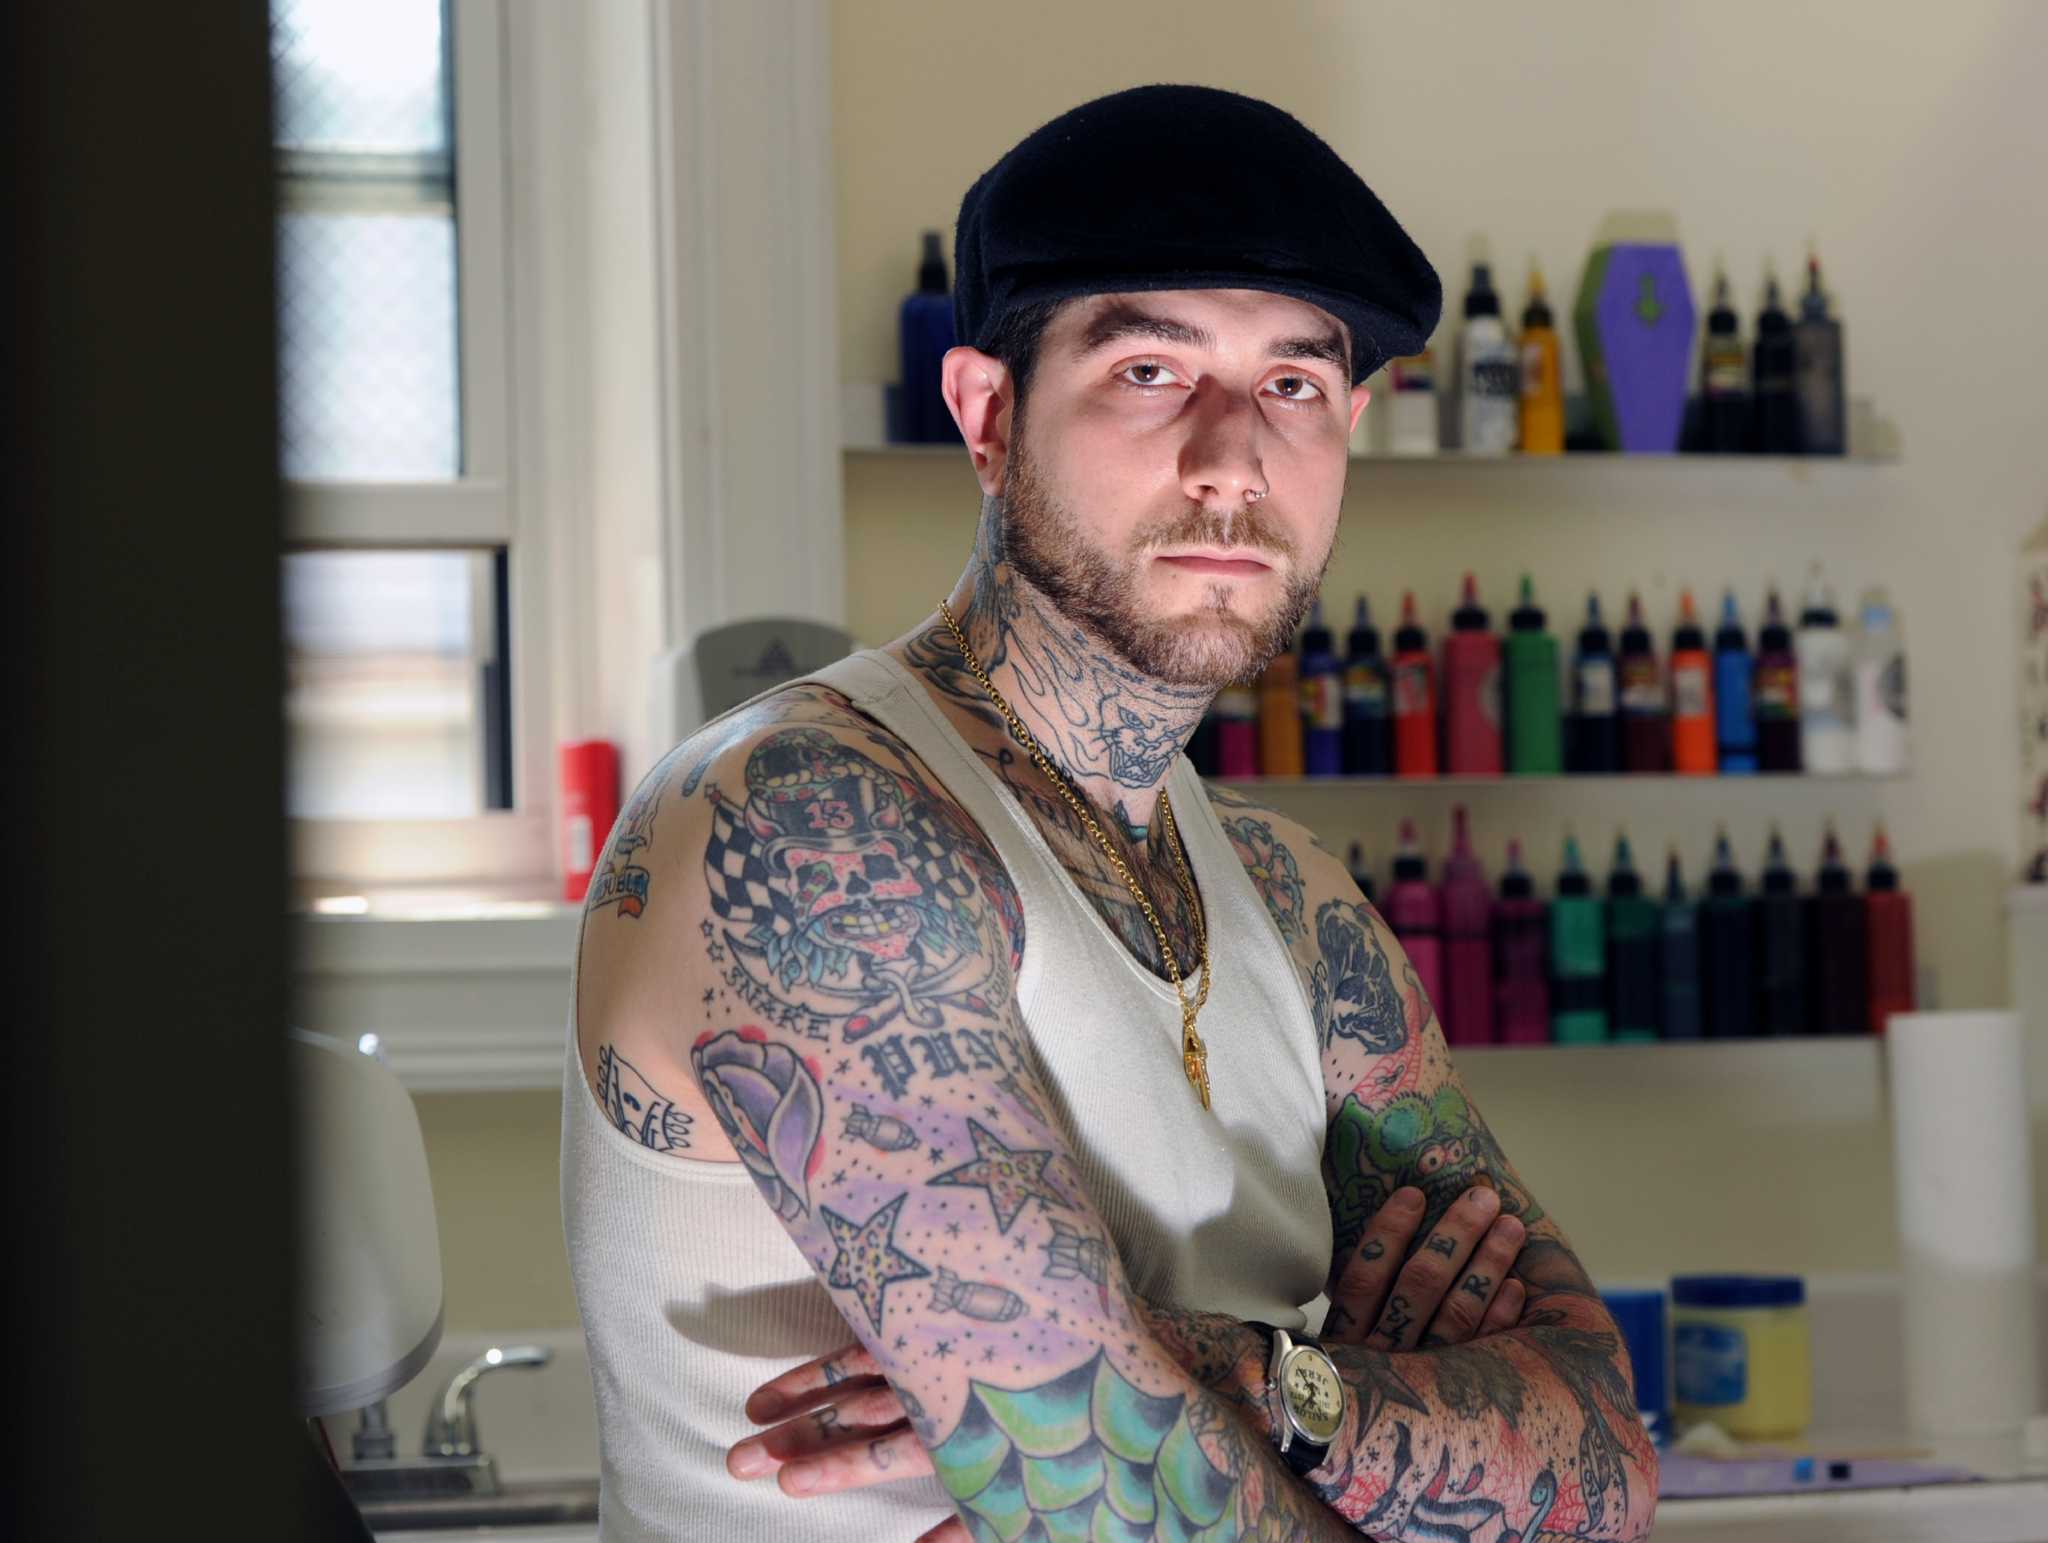 State considers licensing tattoo artists